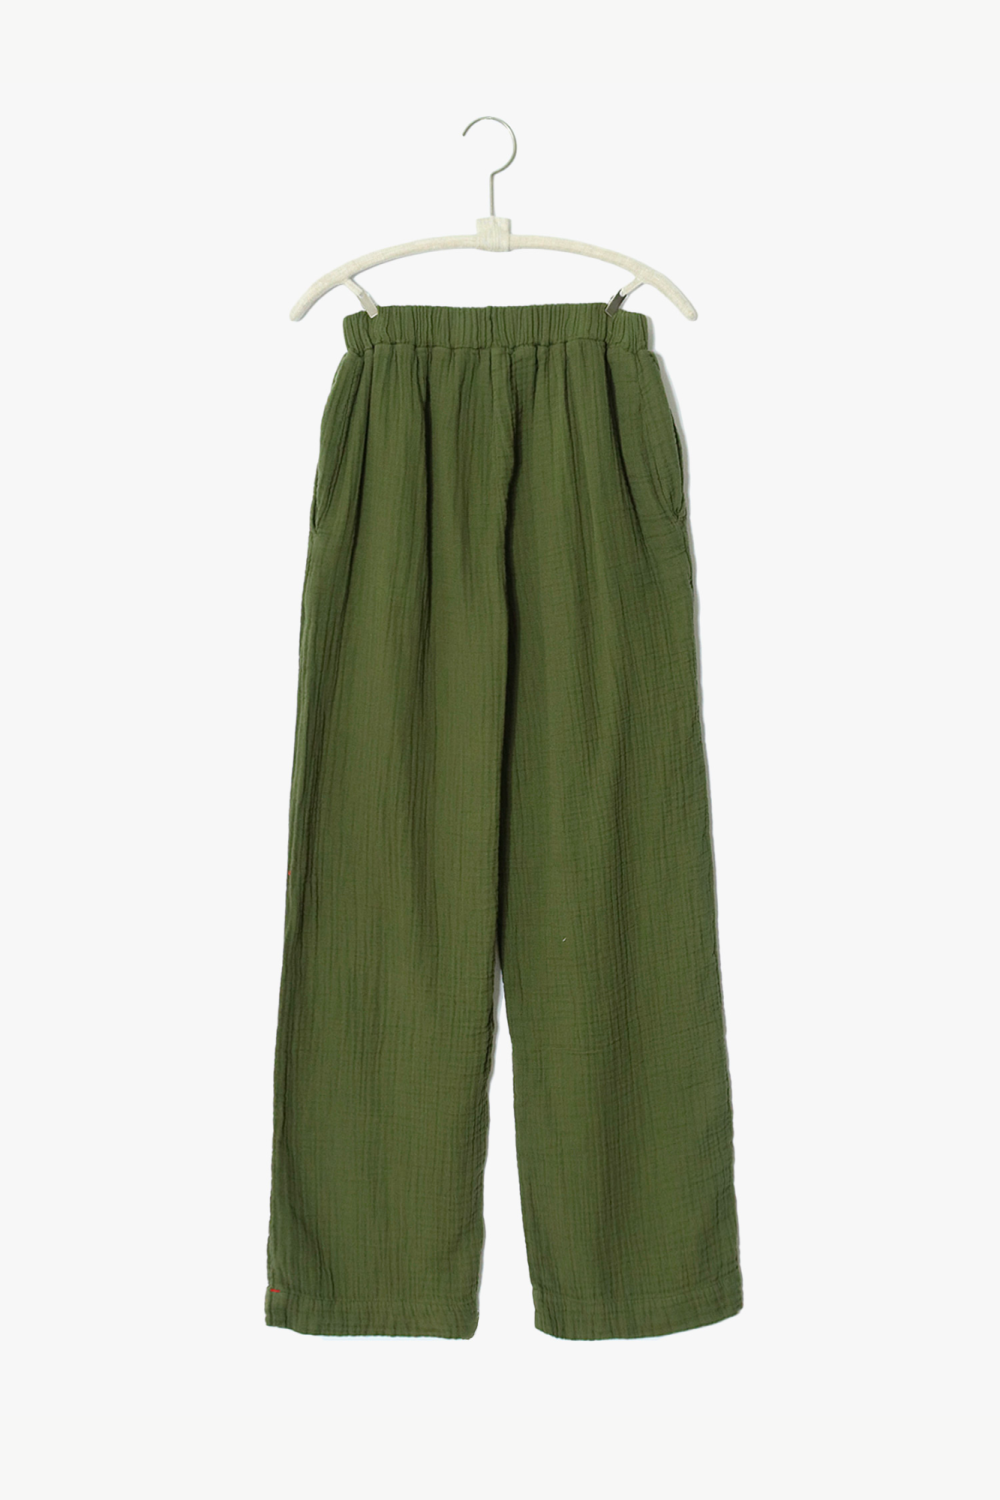 Demsey Pant from Xirena is a wide leg pant crafted from washed double faced cotton gauze for a relaxed, comfortable fit and a soft,